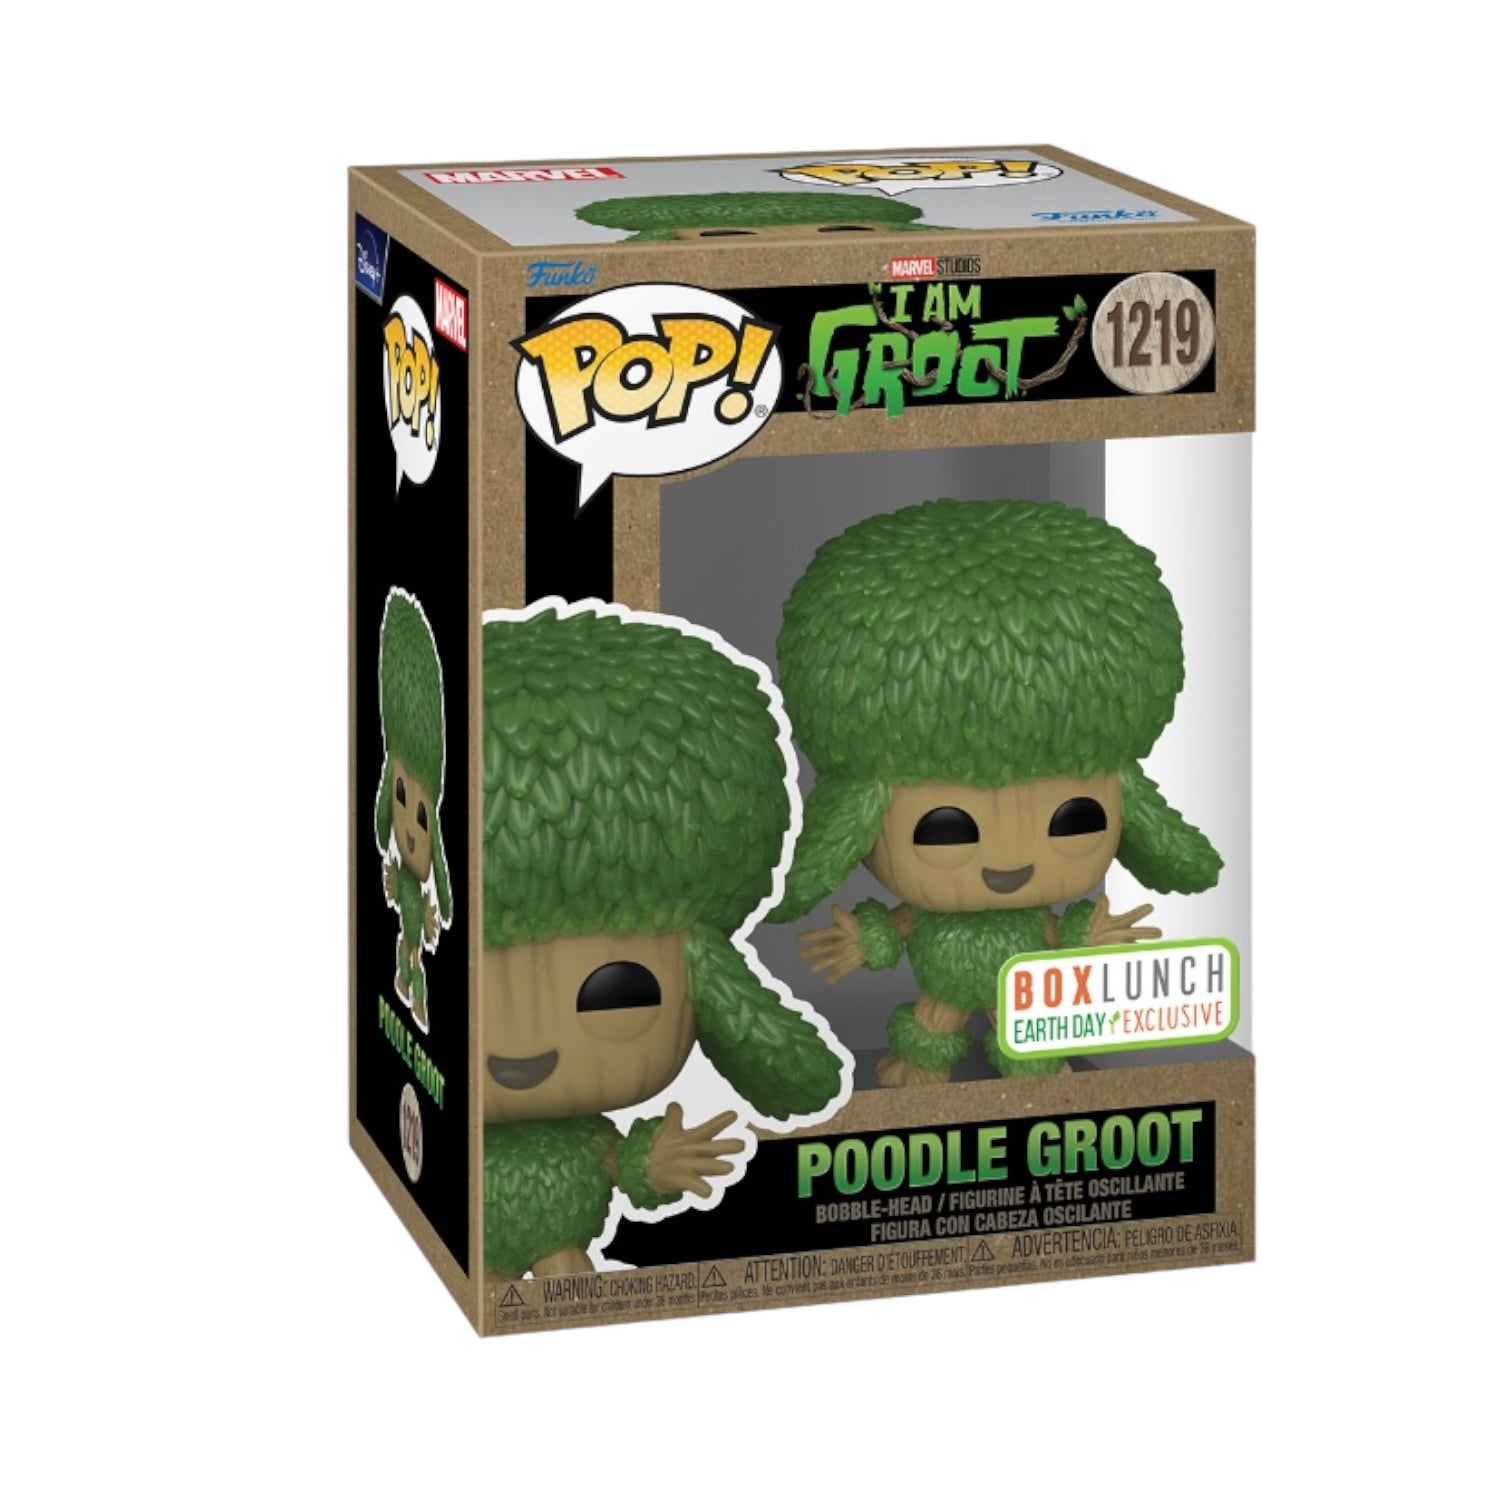 Poodle Groot #1219 Funko Pop! - I Am Groot - Boxlunch Earth Day Exclusive